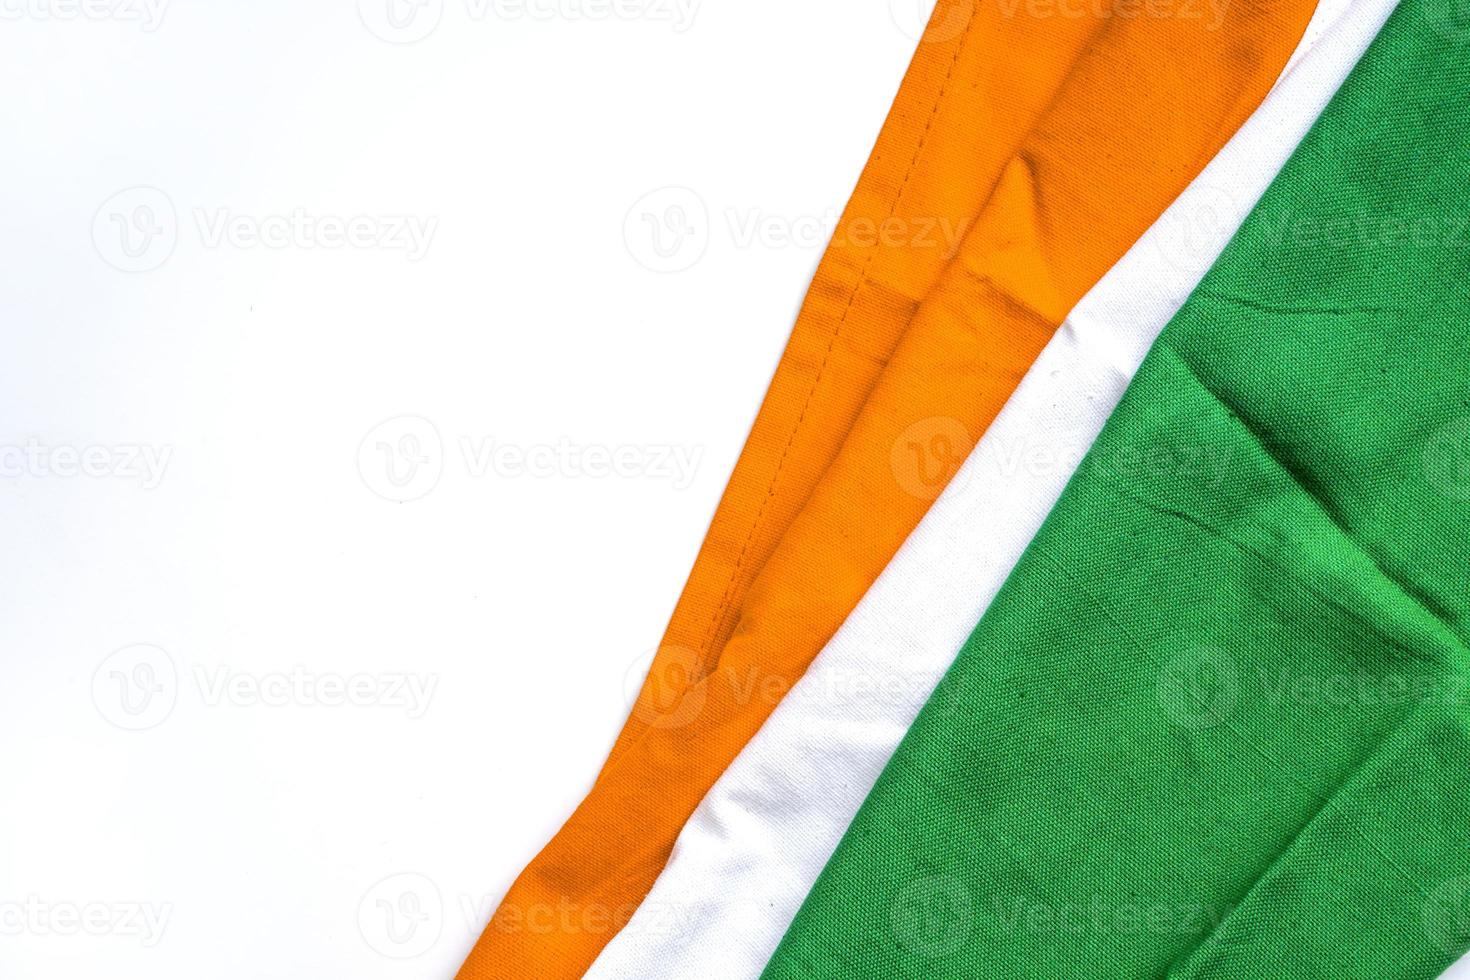 Concept for Indian Independence day and republic day, tricolor indian flag on white background photo